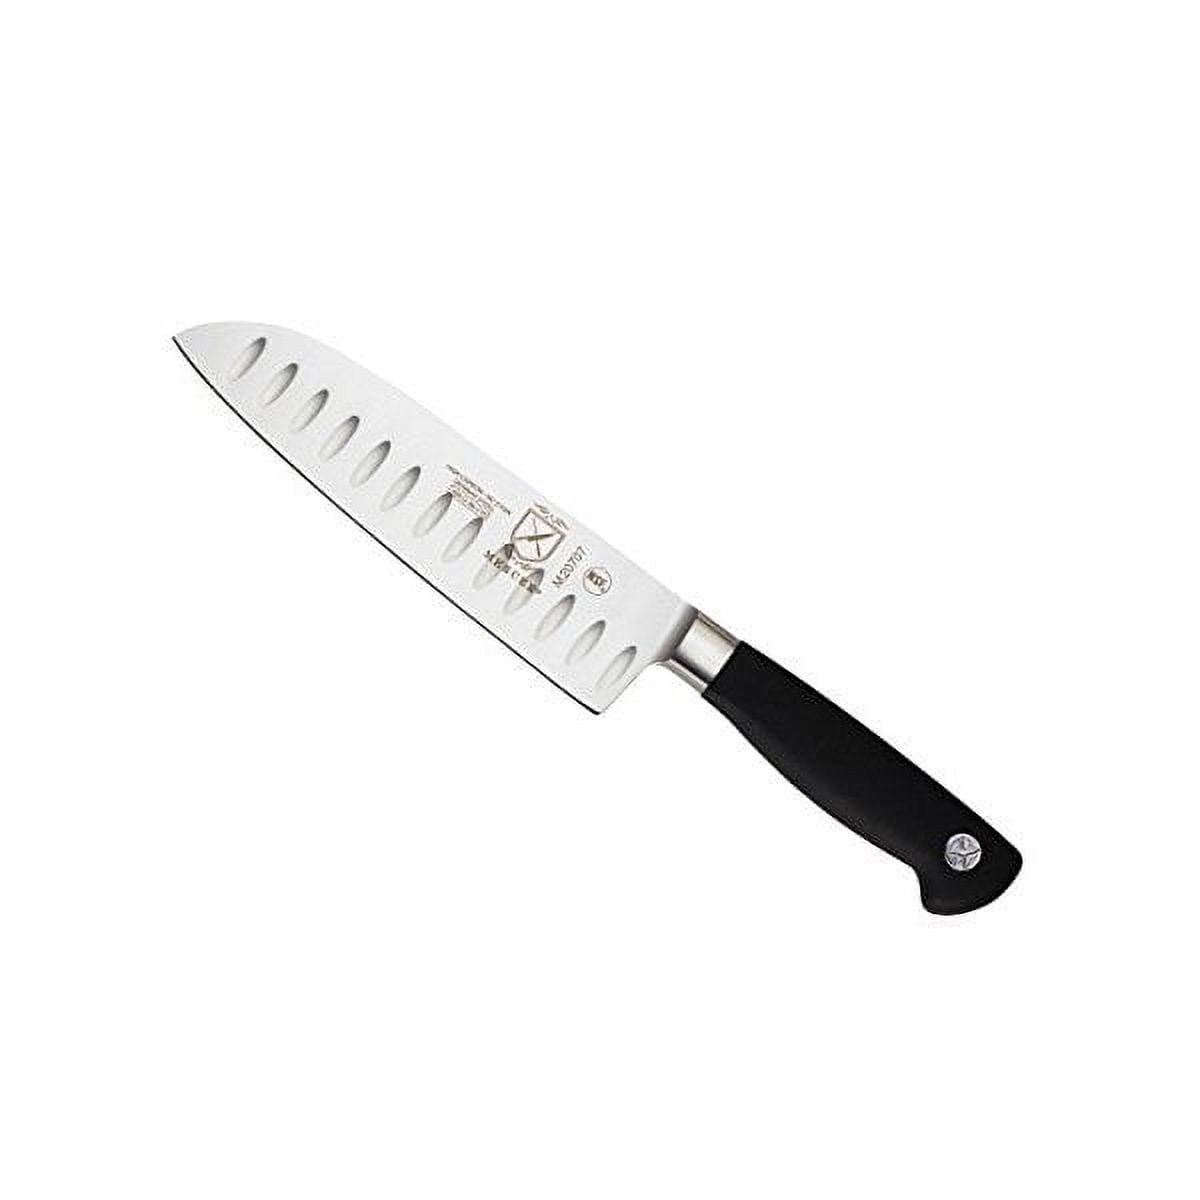 KEEMAKE 7 inch Santoku Knife Japanese Chef Knifes, Forged High Carbon  Stainle